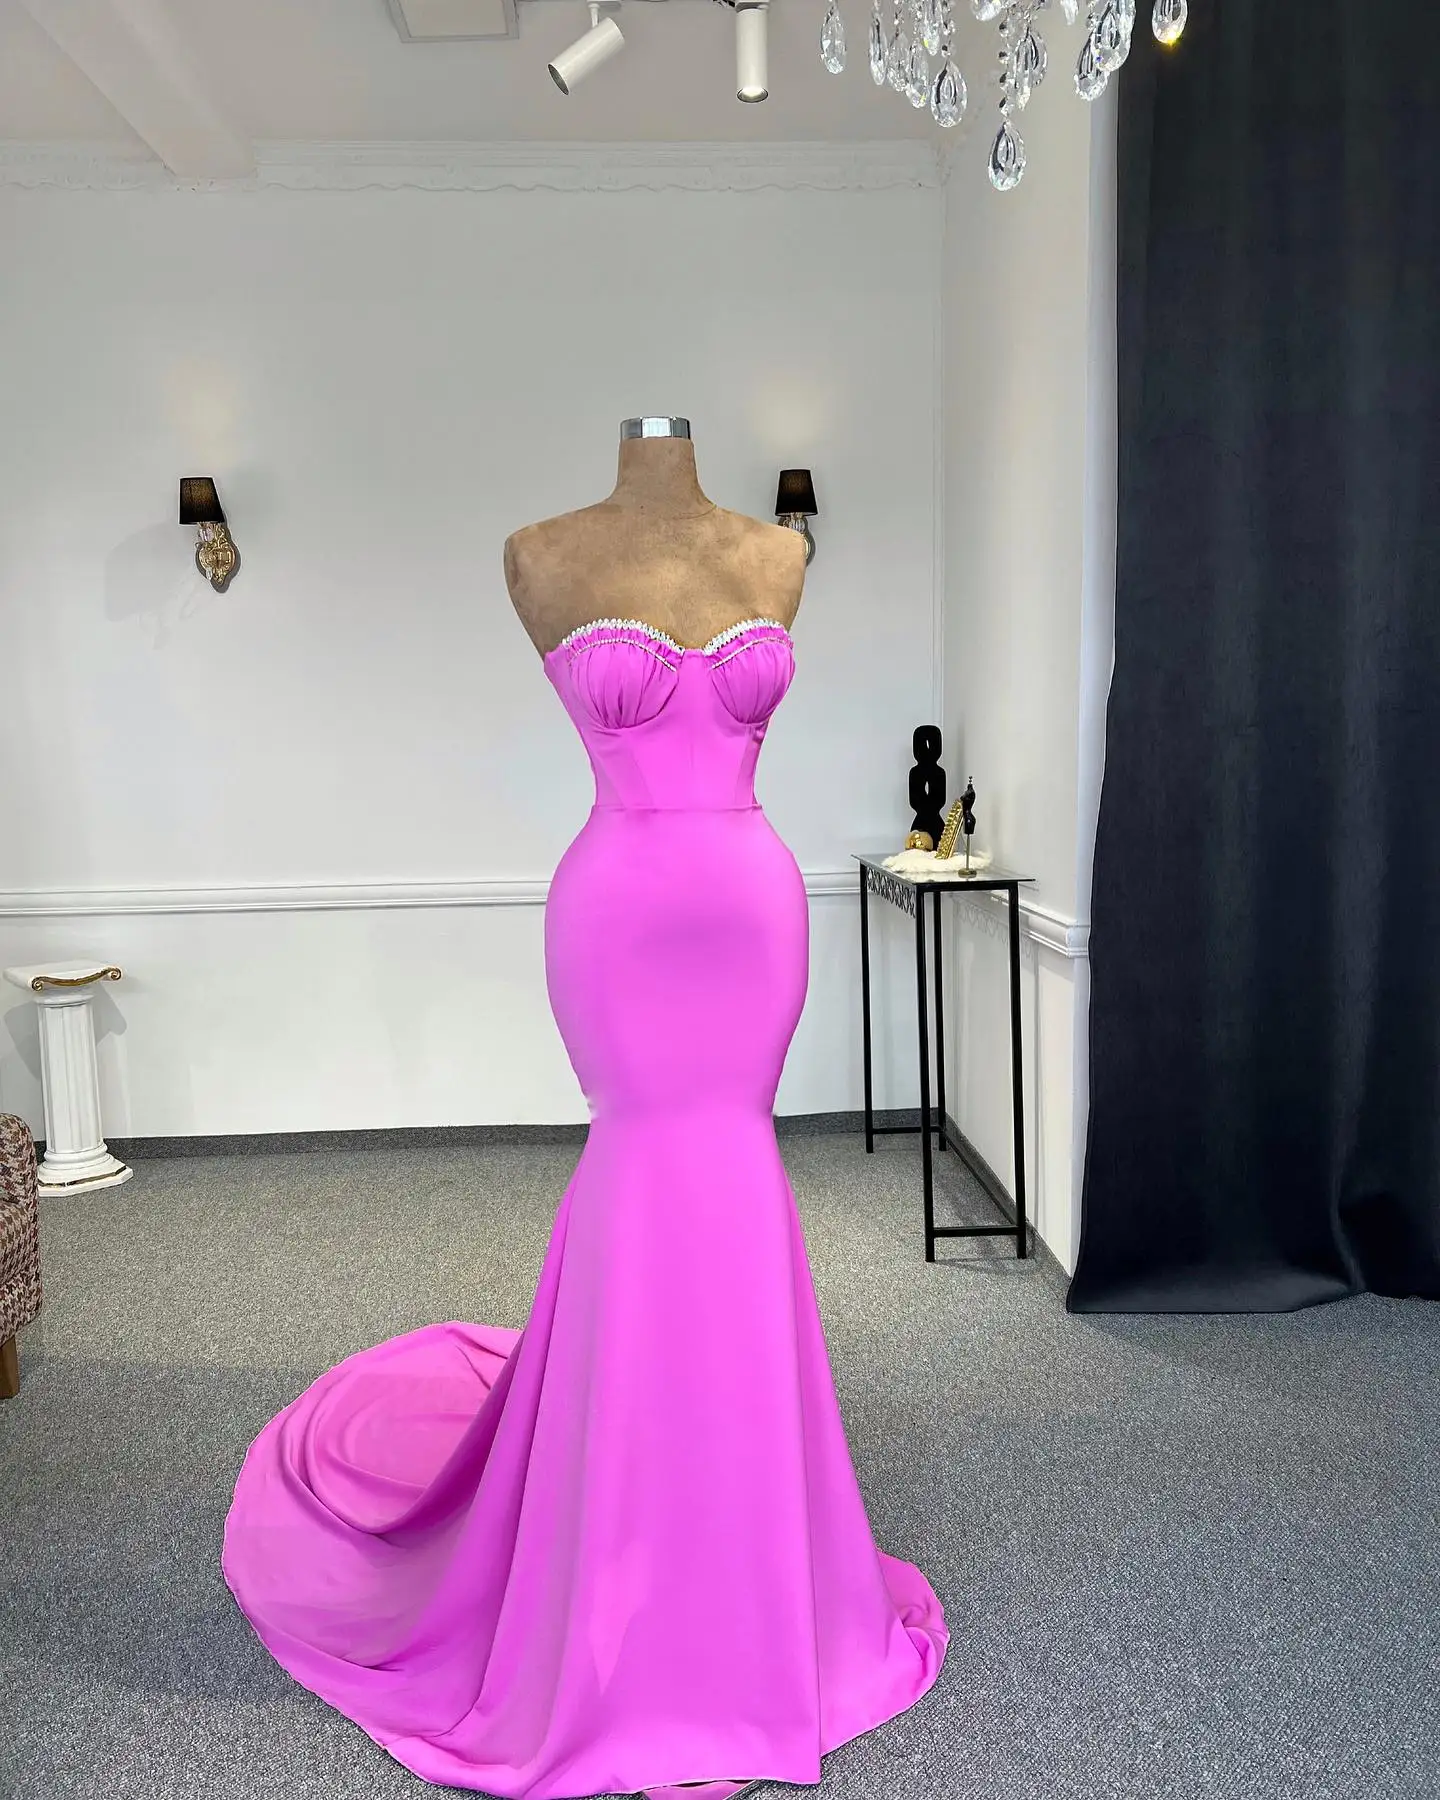 Stunning Fuchsia Stretchy Mermaid Long Evening Dresses With A Corset Bustier Beaded Sweetheart Lace Up Back Long Maxi Gowns